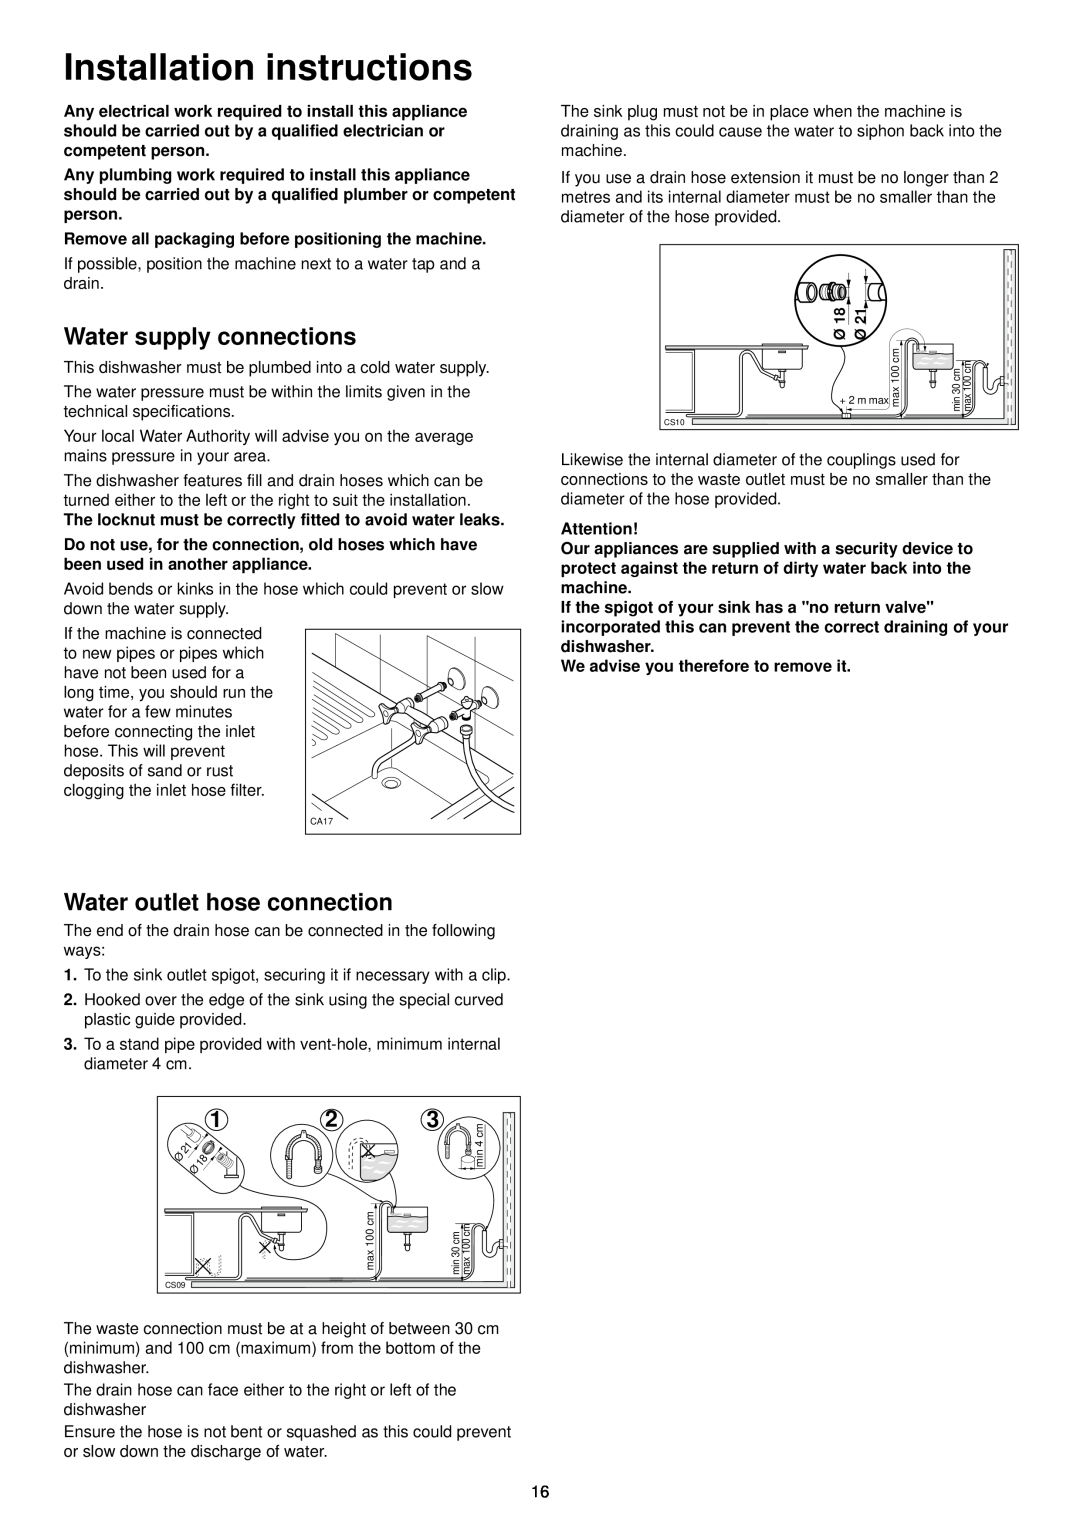 Tricity Bendix BDW 60 manual Installation instructions, Water supply connections, Water outlet hose connection 